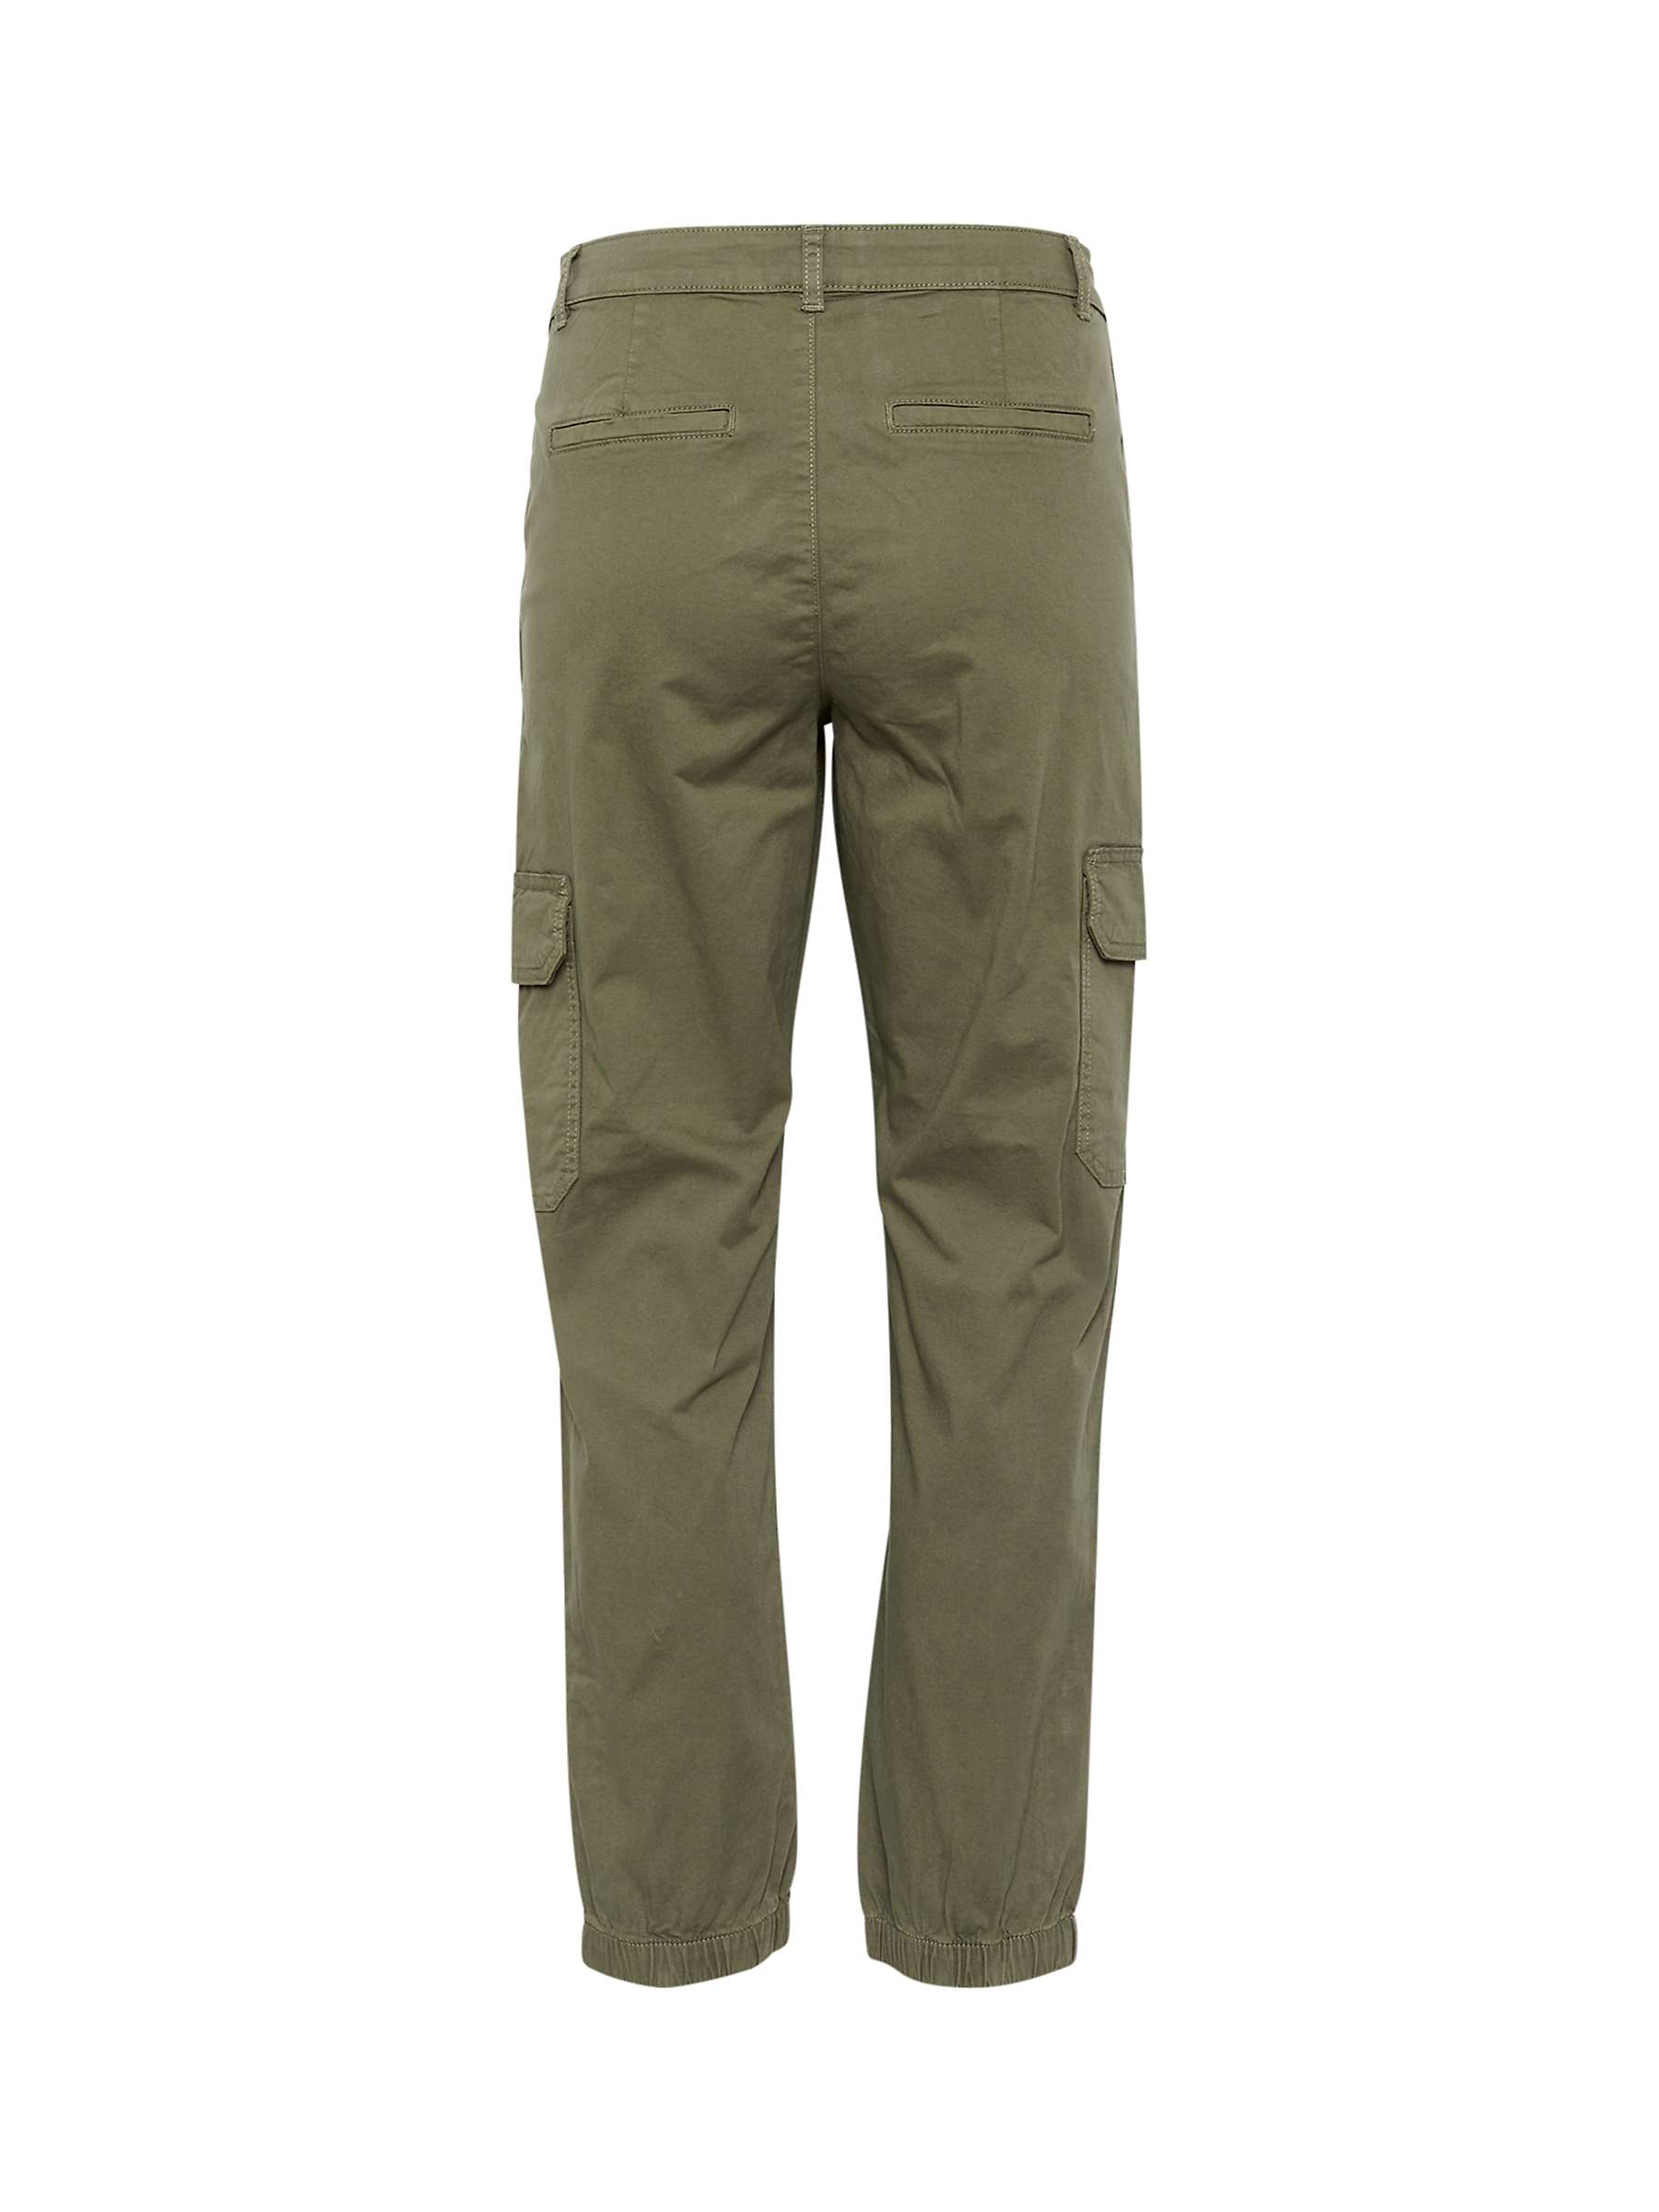 Buy Part Two Sevens Cargo Trousers Online at johnlewis.com